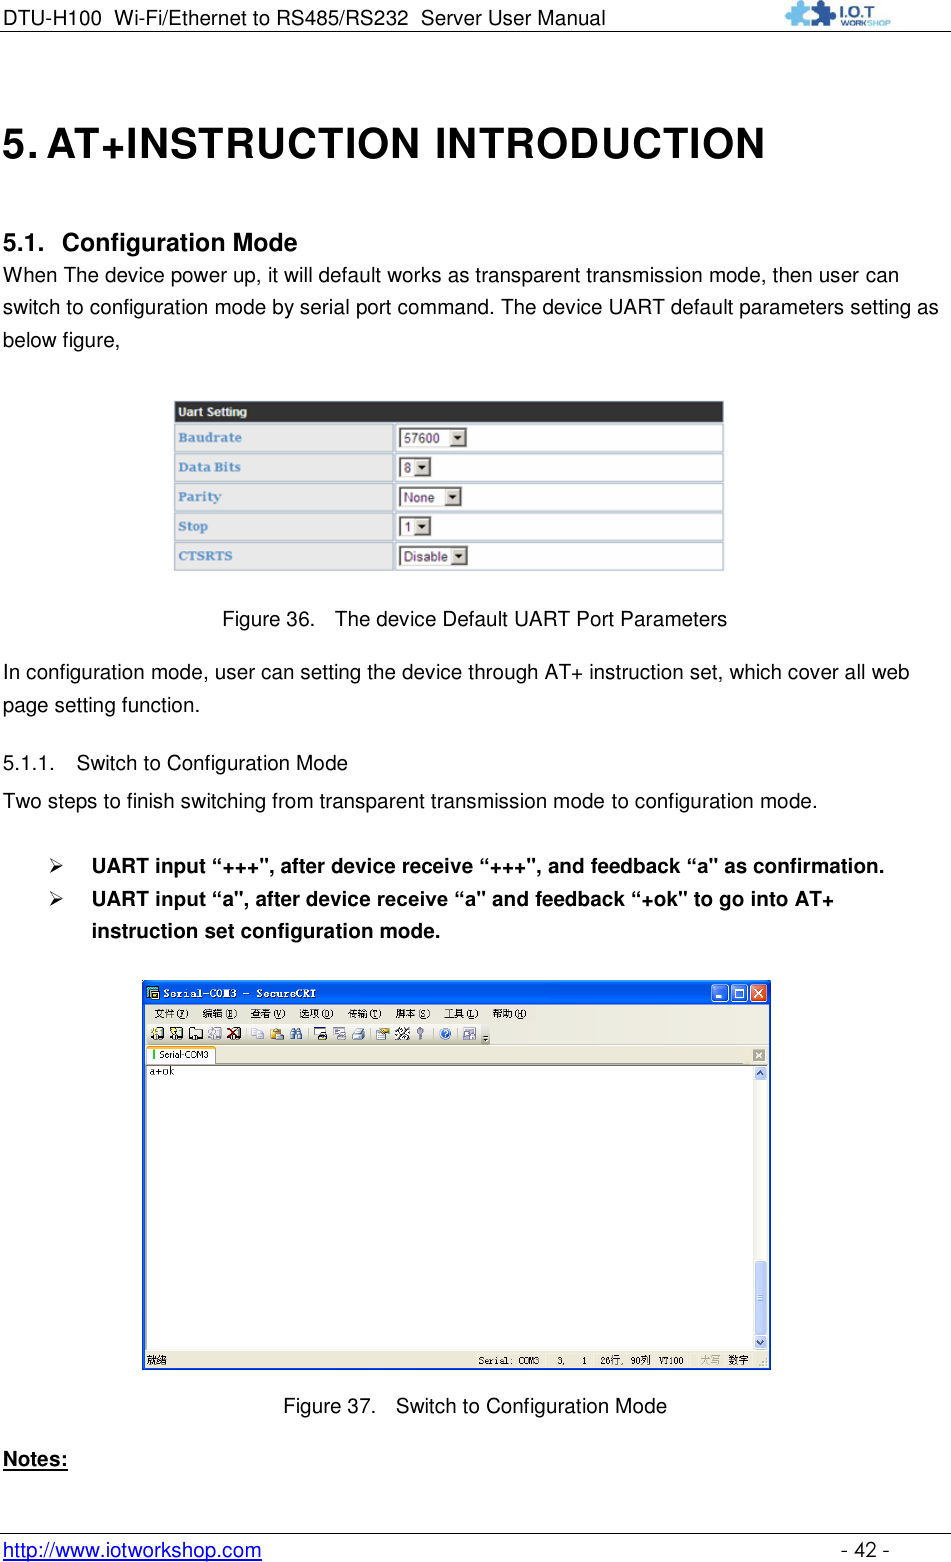 DTU-H100 Wi-Fi/Ethernet to RS485/RS232  Server User Manual    http://www.iotworkshop.com    - 42 - 5. AT+INSTRUCTION INTRODUCTION 5.1. Configuration Mode When The device power up, it will default works as transparent transmission mode, then user can switch to configuration mode by serial port command. The device UART default parameters setting as below figure,   Figure 36. The device Default UART Port Parameters In configuration mode, user can setting the device through AT+ instruction set, which cover all web page setting function. 5.1.1. Switch to Configuration Mode Two steps to finish switching from transparent transmission mode to configuration mode.   UART input “+++&quot;, after device receive “+++&quot;, and feedback “a&quot; as confirmation.  UART input “a&quot;, after device receive “a&quot; and feedback “+ok&quot; to go into AT+ instruction set configuration mode.   Figure 37. Switch to Configuration Mode Notes: 